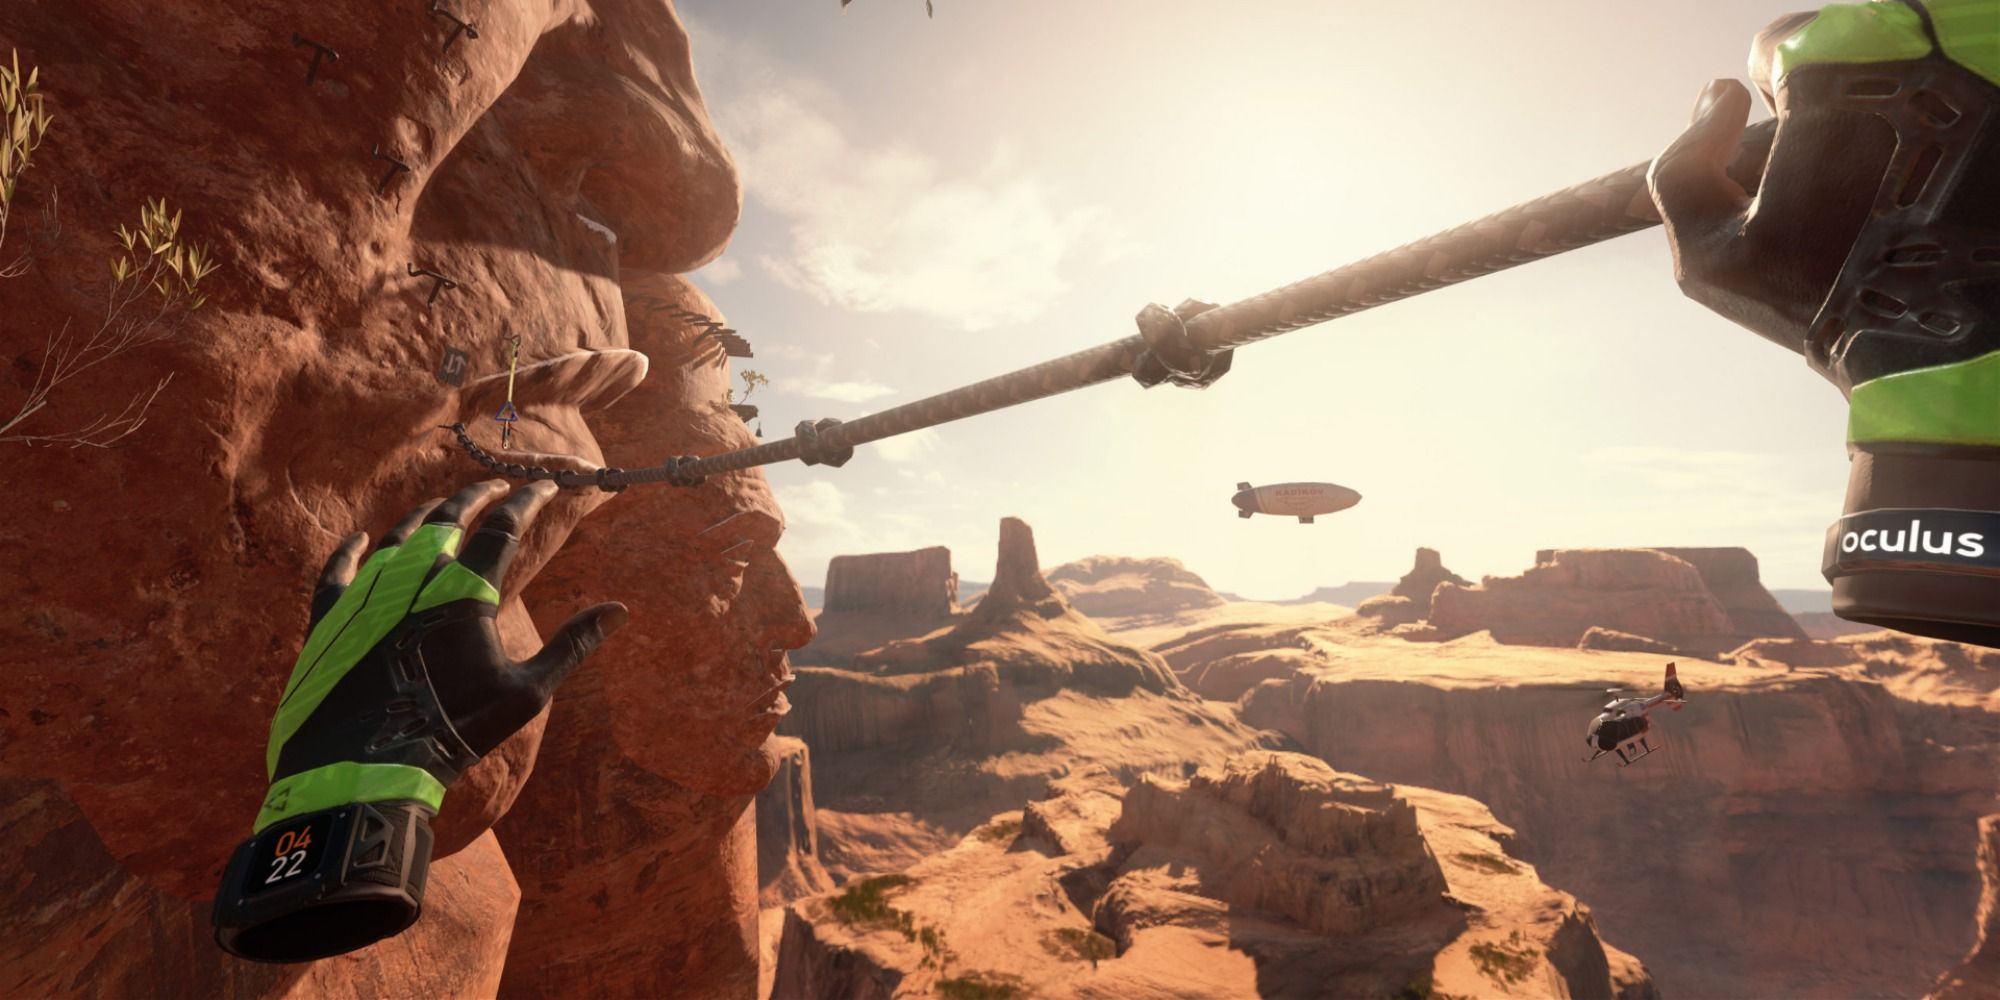 A pair of floating gloves grips a taut rope, climbing across a desert canyon with helicopter and blimp in the background